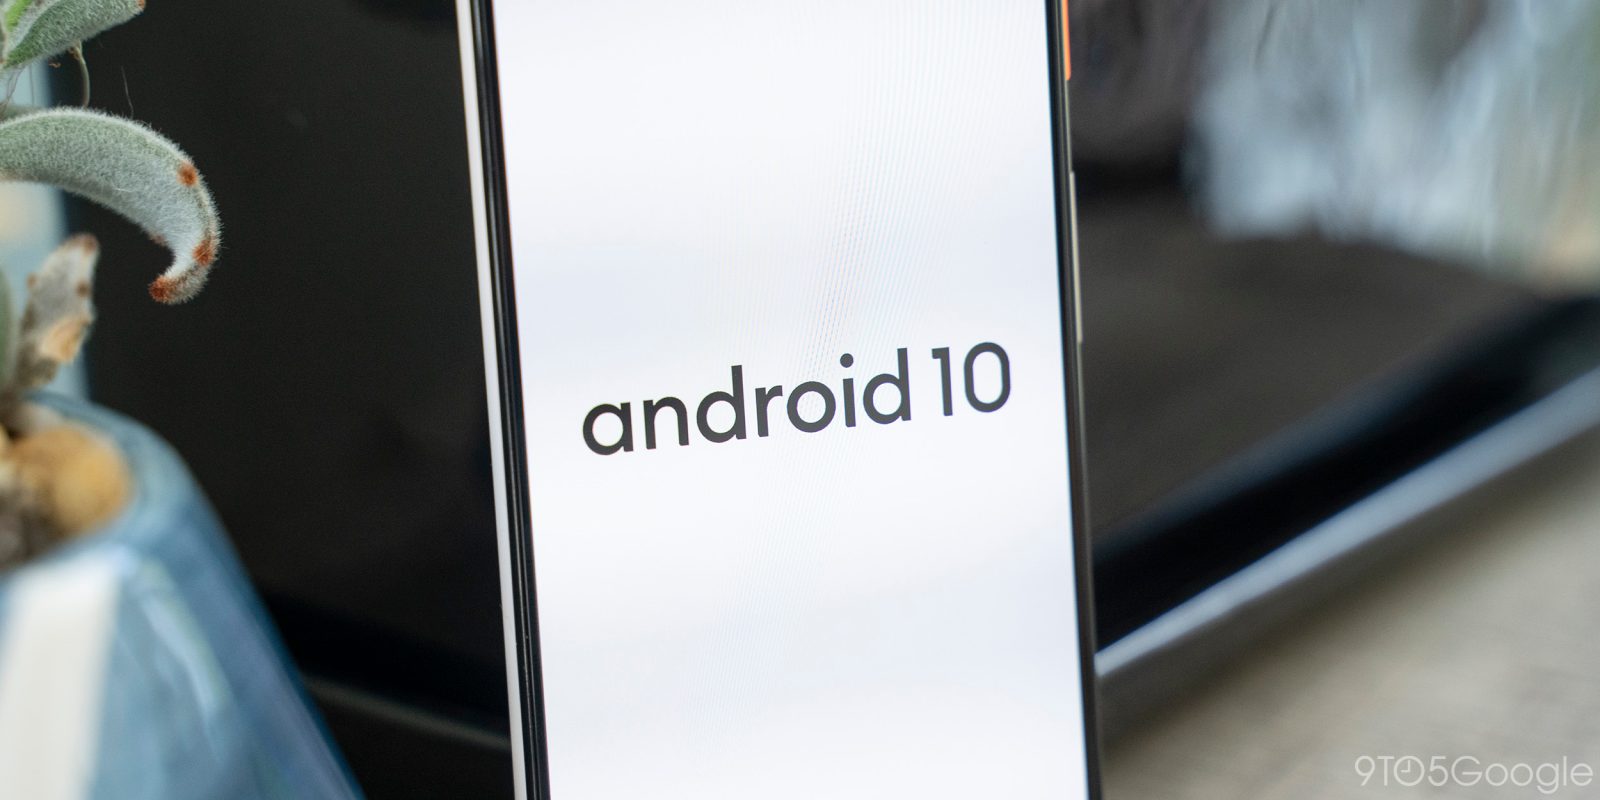 Android 10 to be Launched on September 3